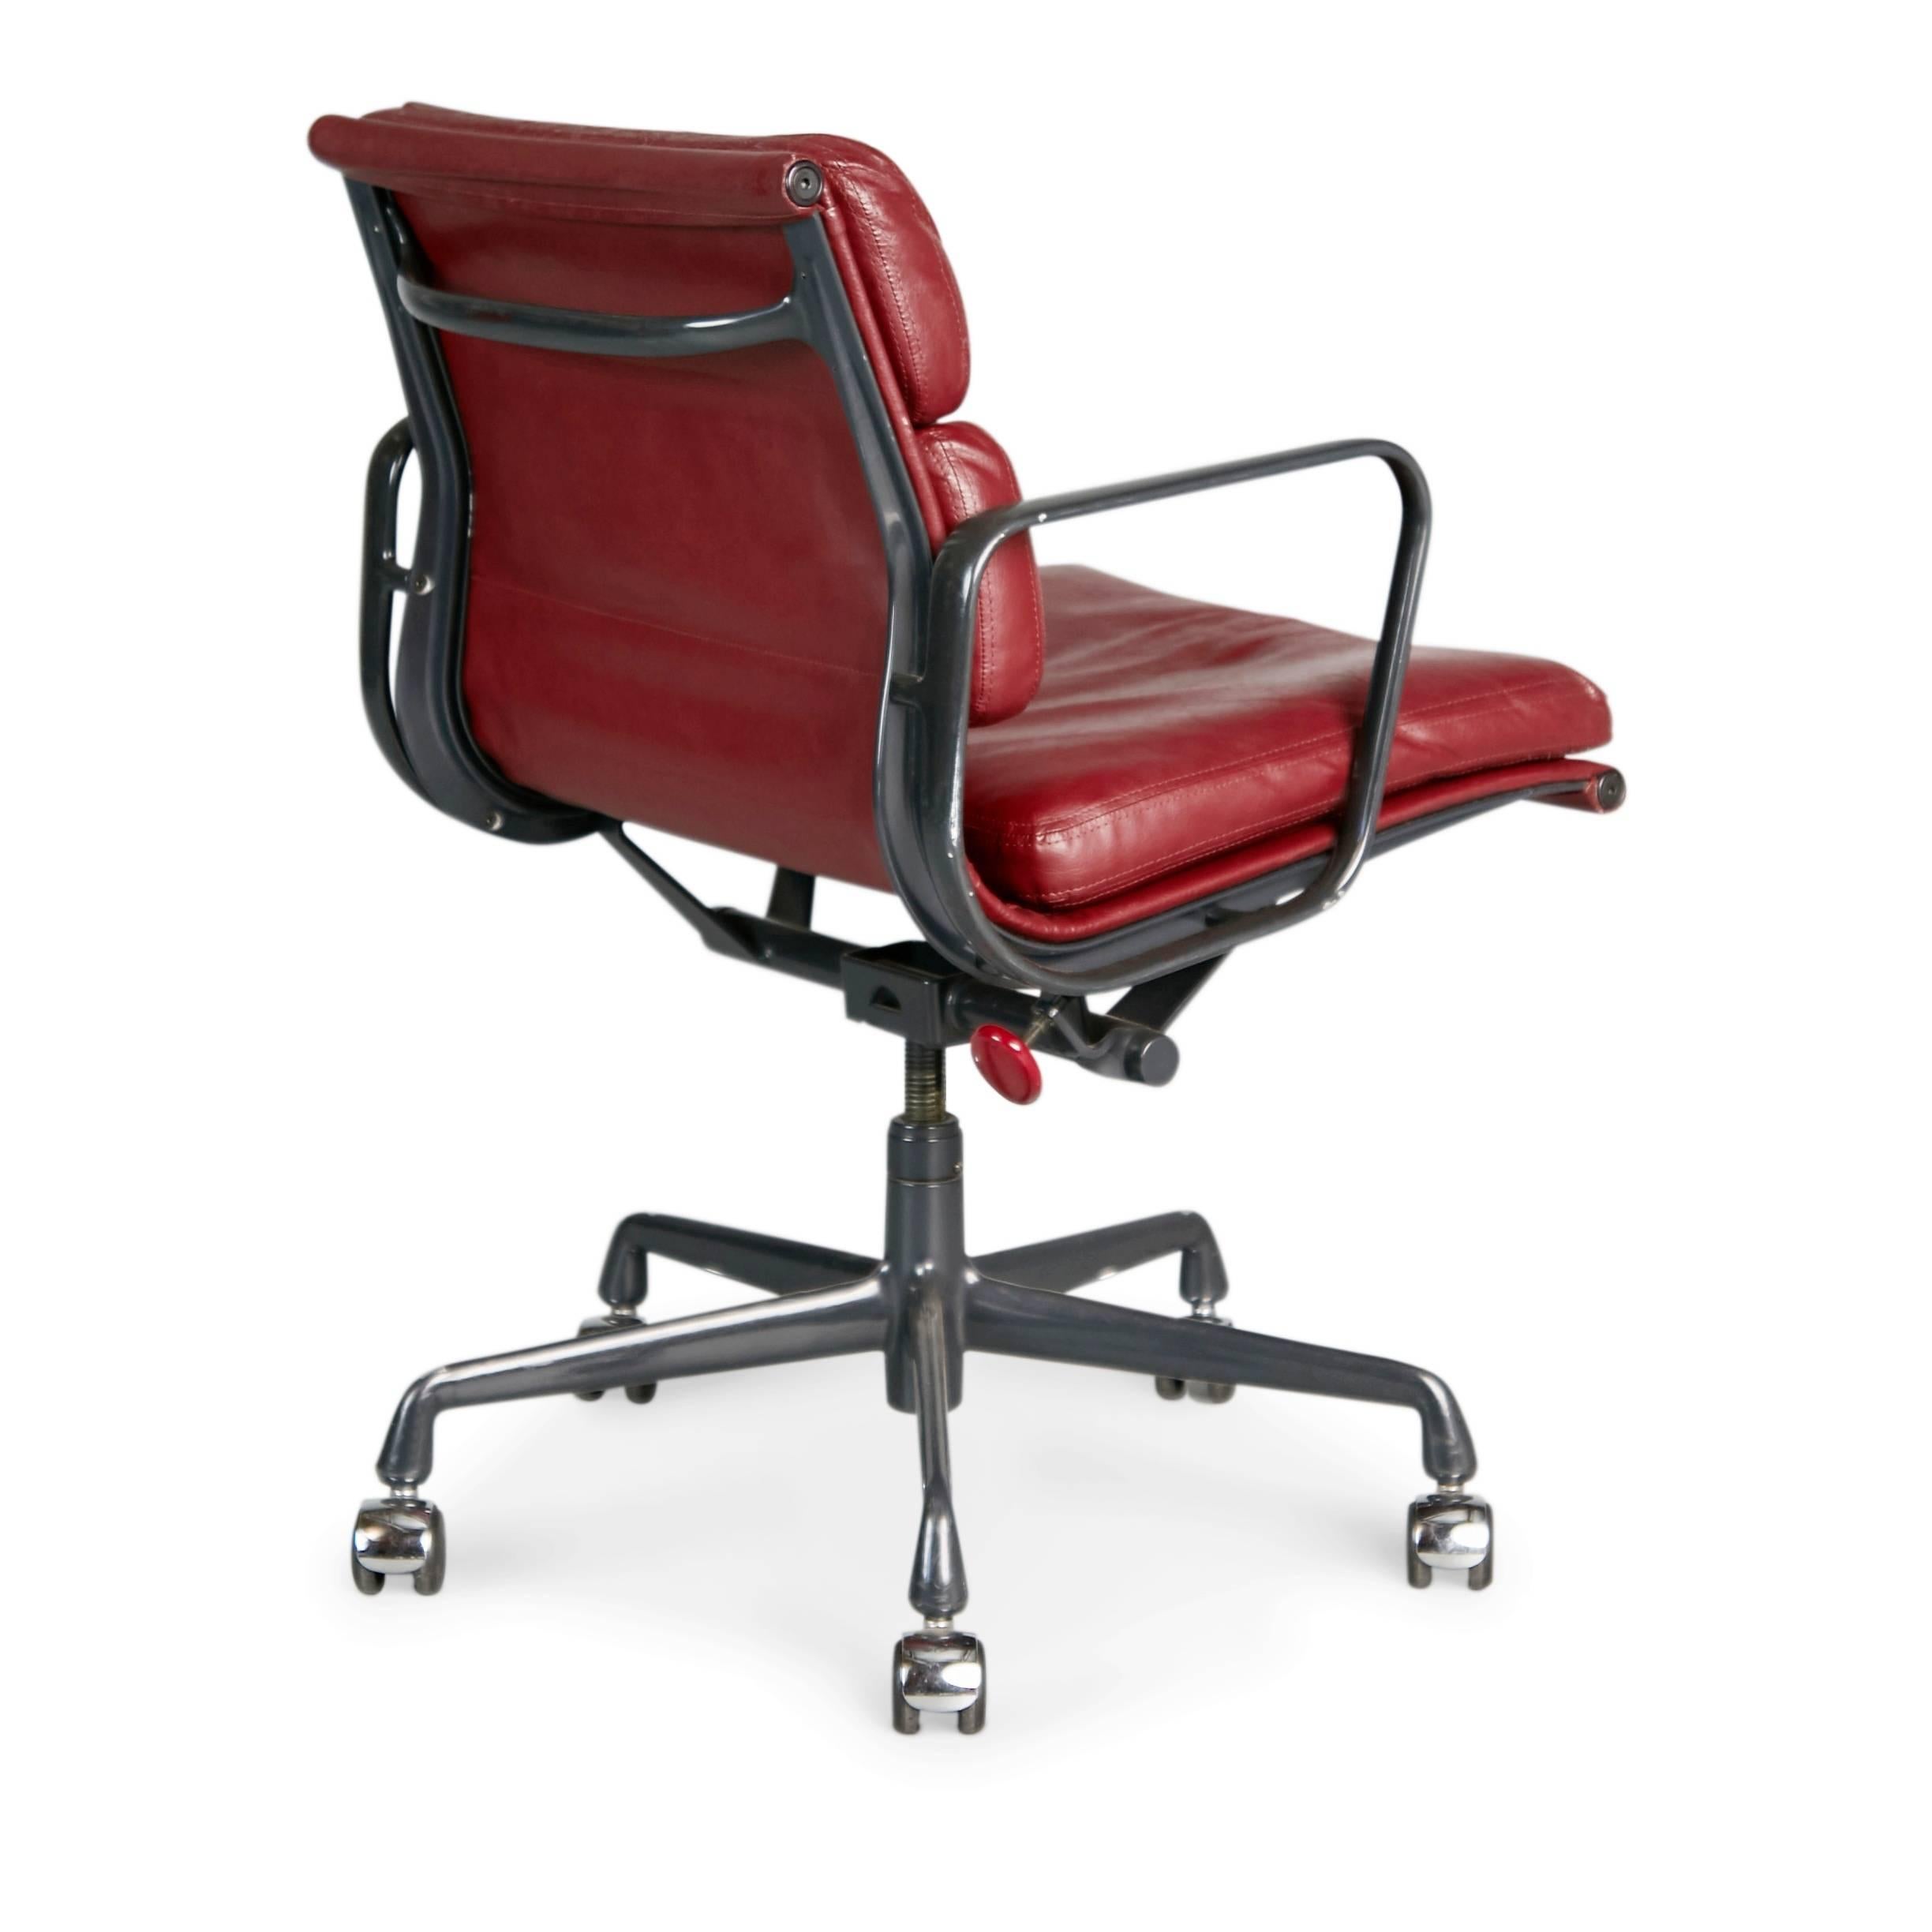 Late 20th Century Charles Eames for Herman Miller Burgundy Soft Pad Management Chairs, circa 1980